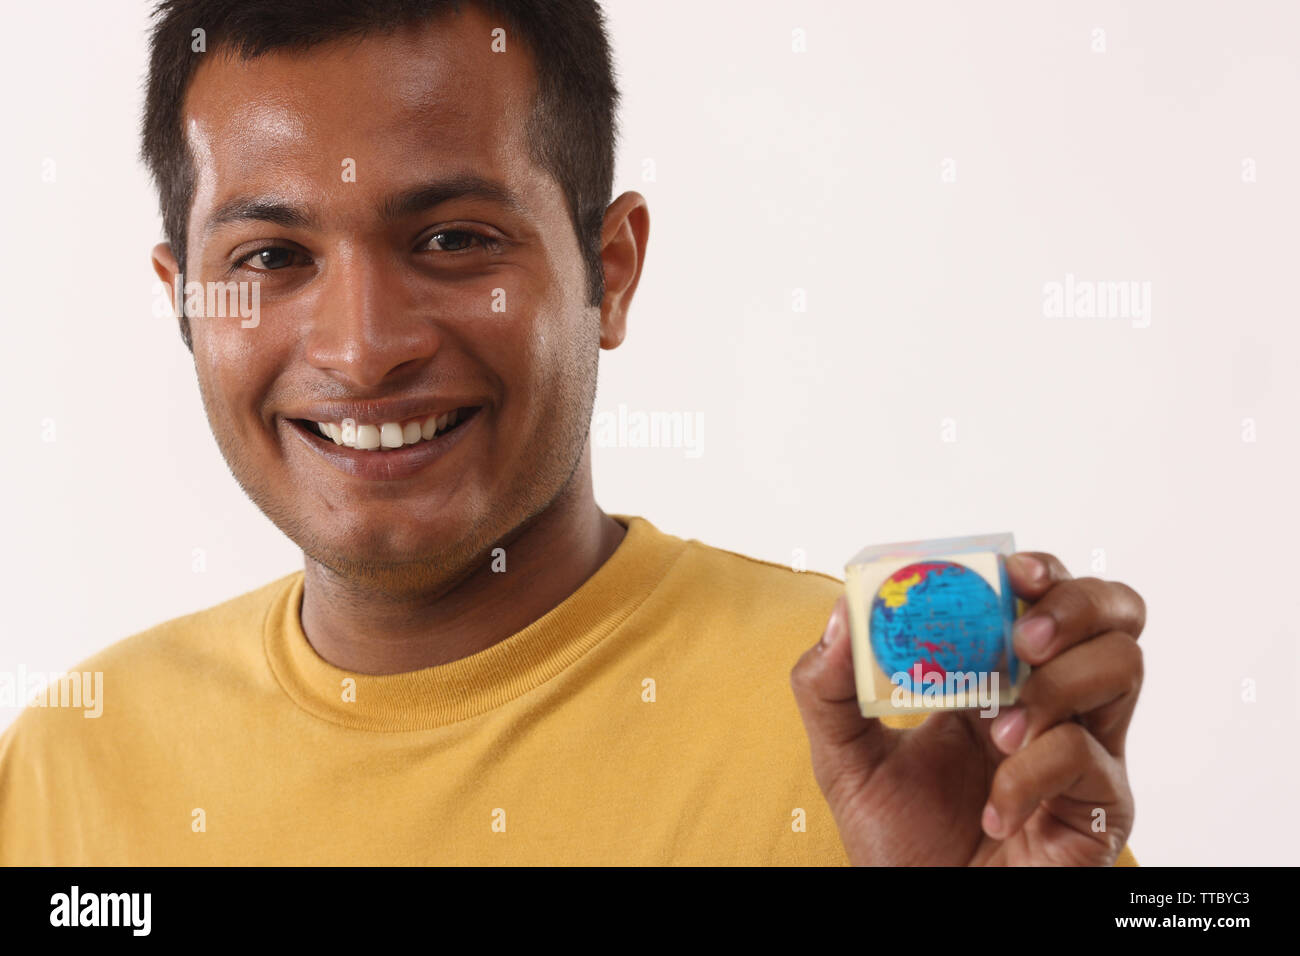 Young man showing a paperweight and smiling Stock Photo